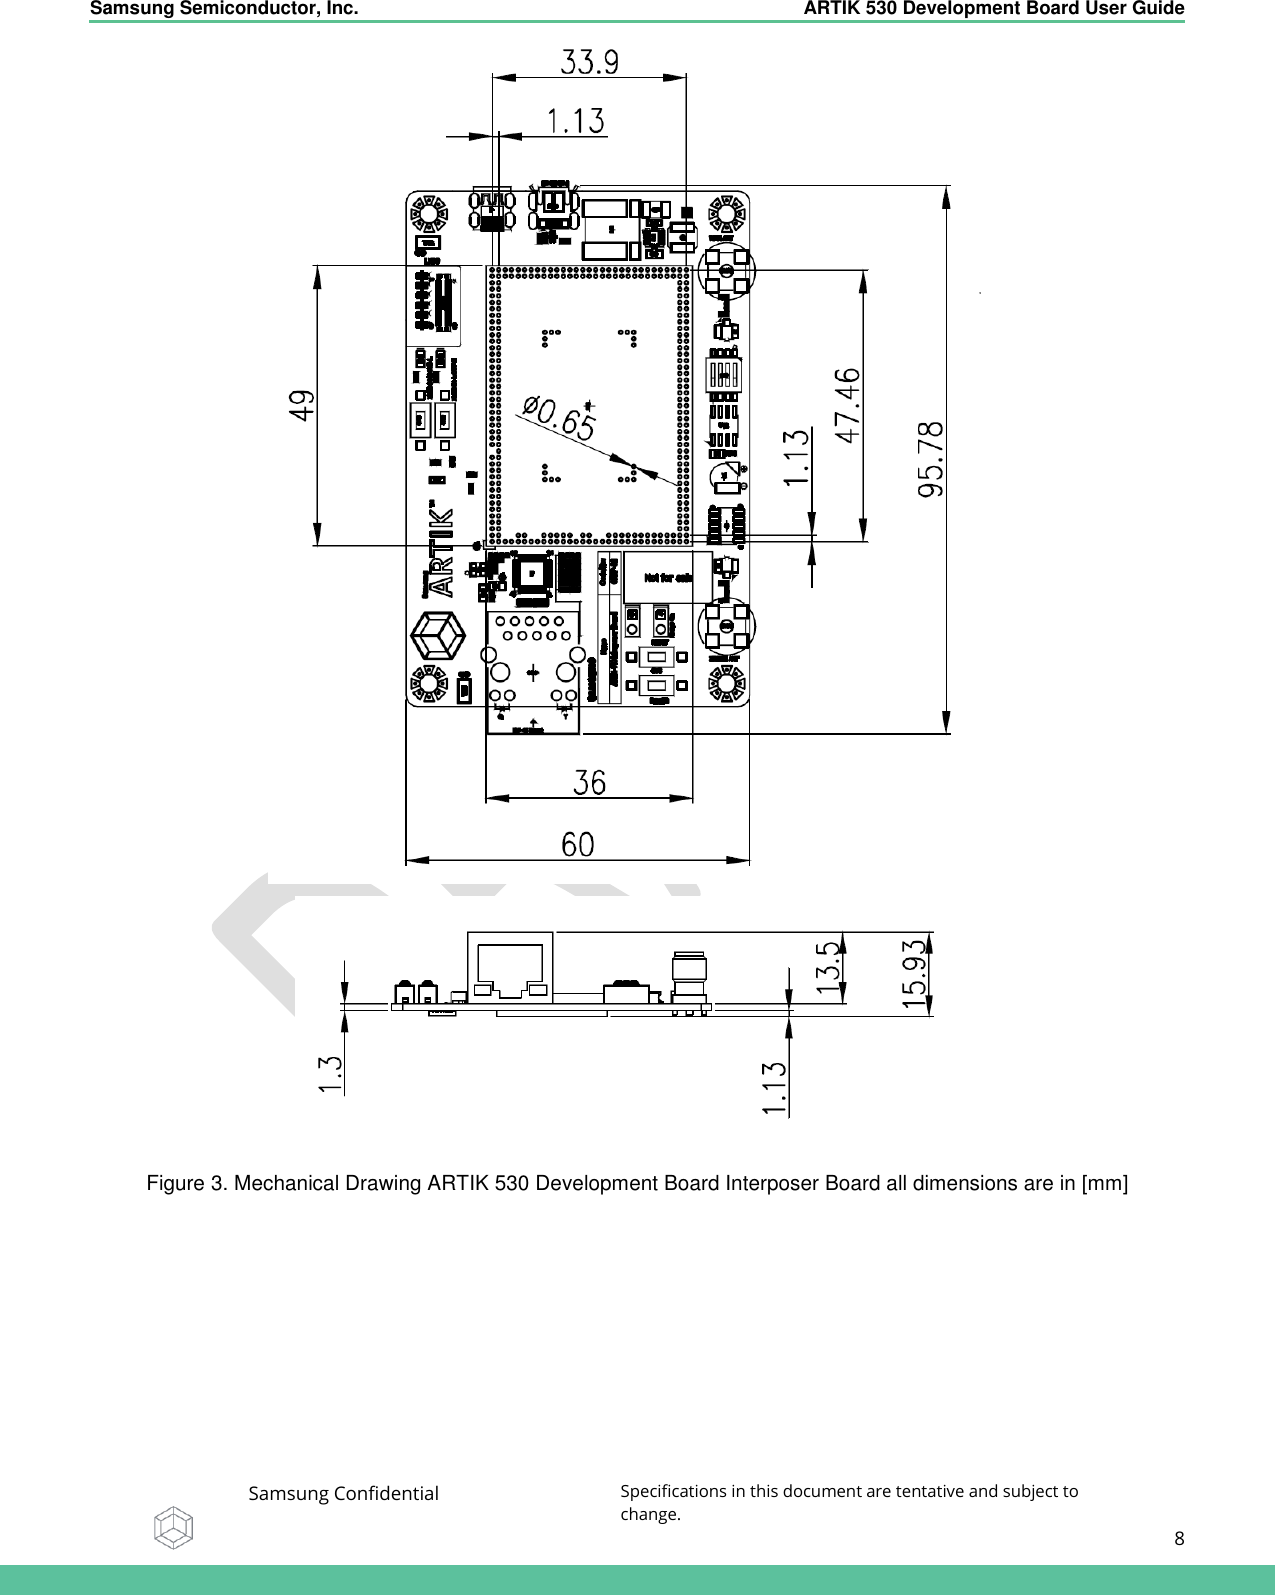    Samsung Semiconductor, Inc.  ARTIK 530 Development Board User Guide   Samsung Confidential Specifications in this document are tentative and subject to change.  8     Figure 3. Mechanical Drawing ARTIK 530 Development Board Interposer Board all dimensions are in [mm] 